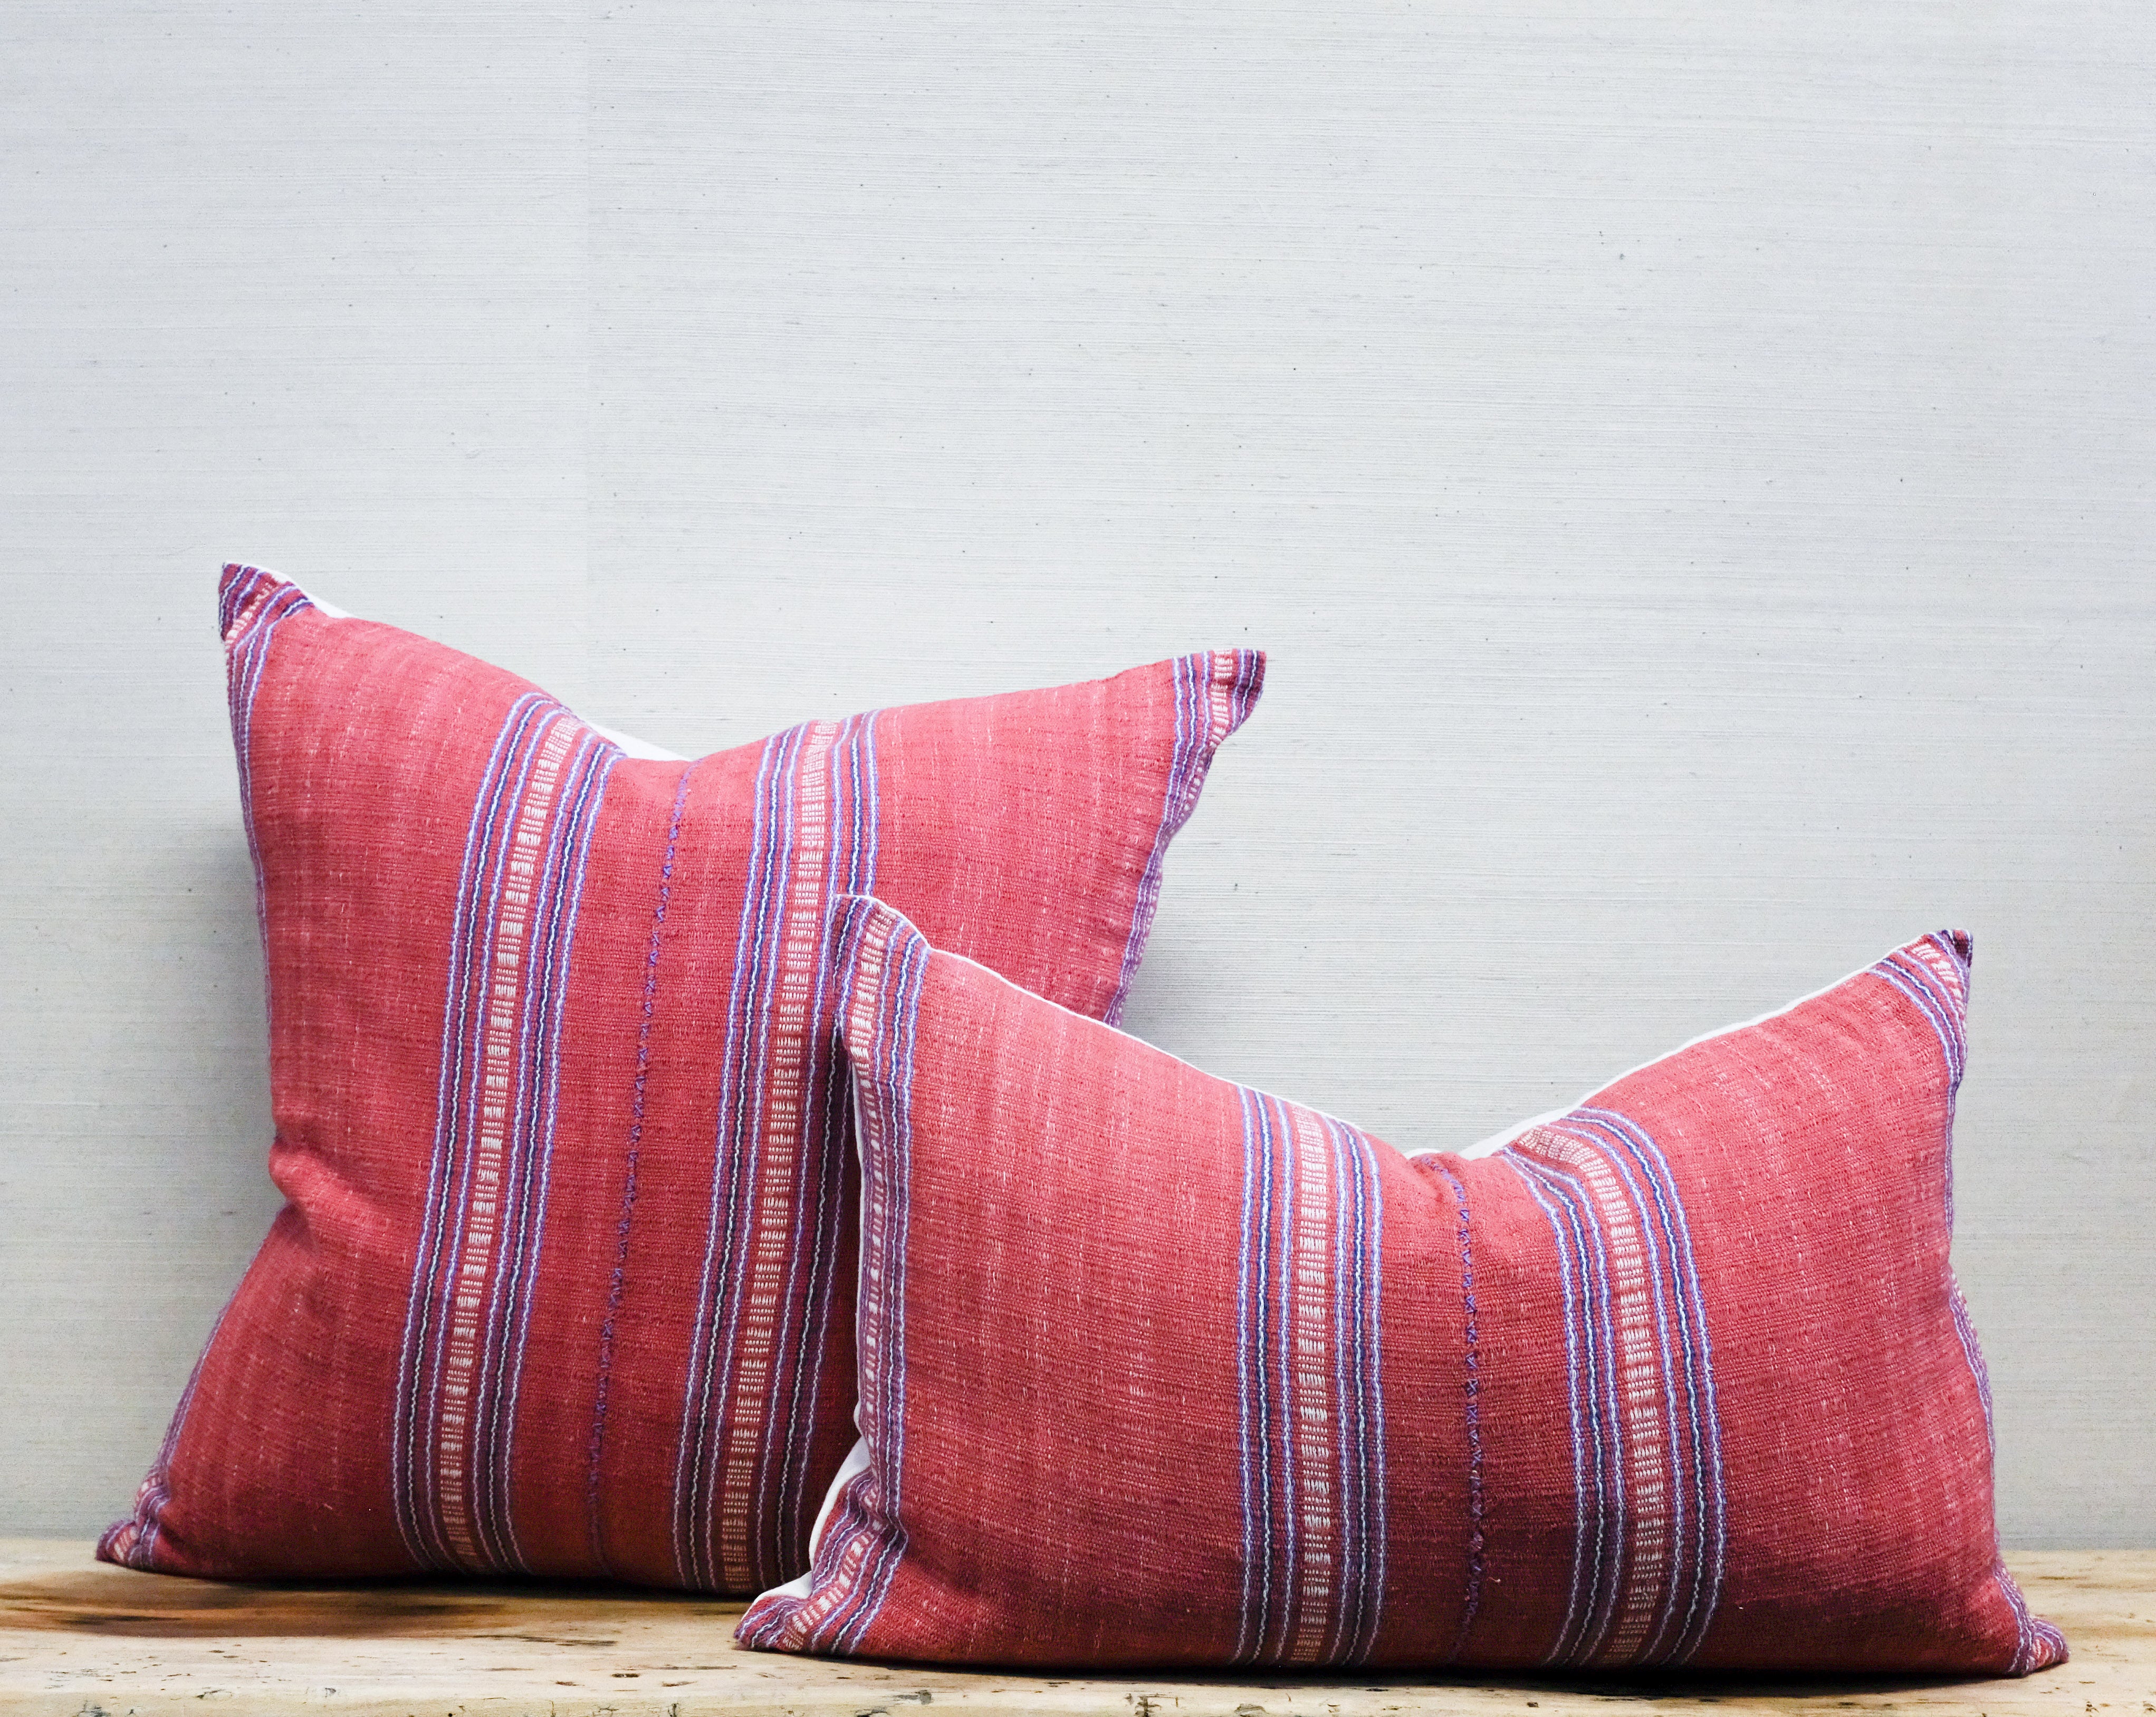 square and oblong pillows in red, white and blue stripes